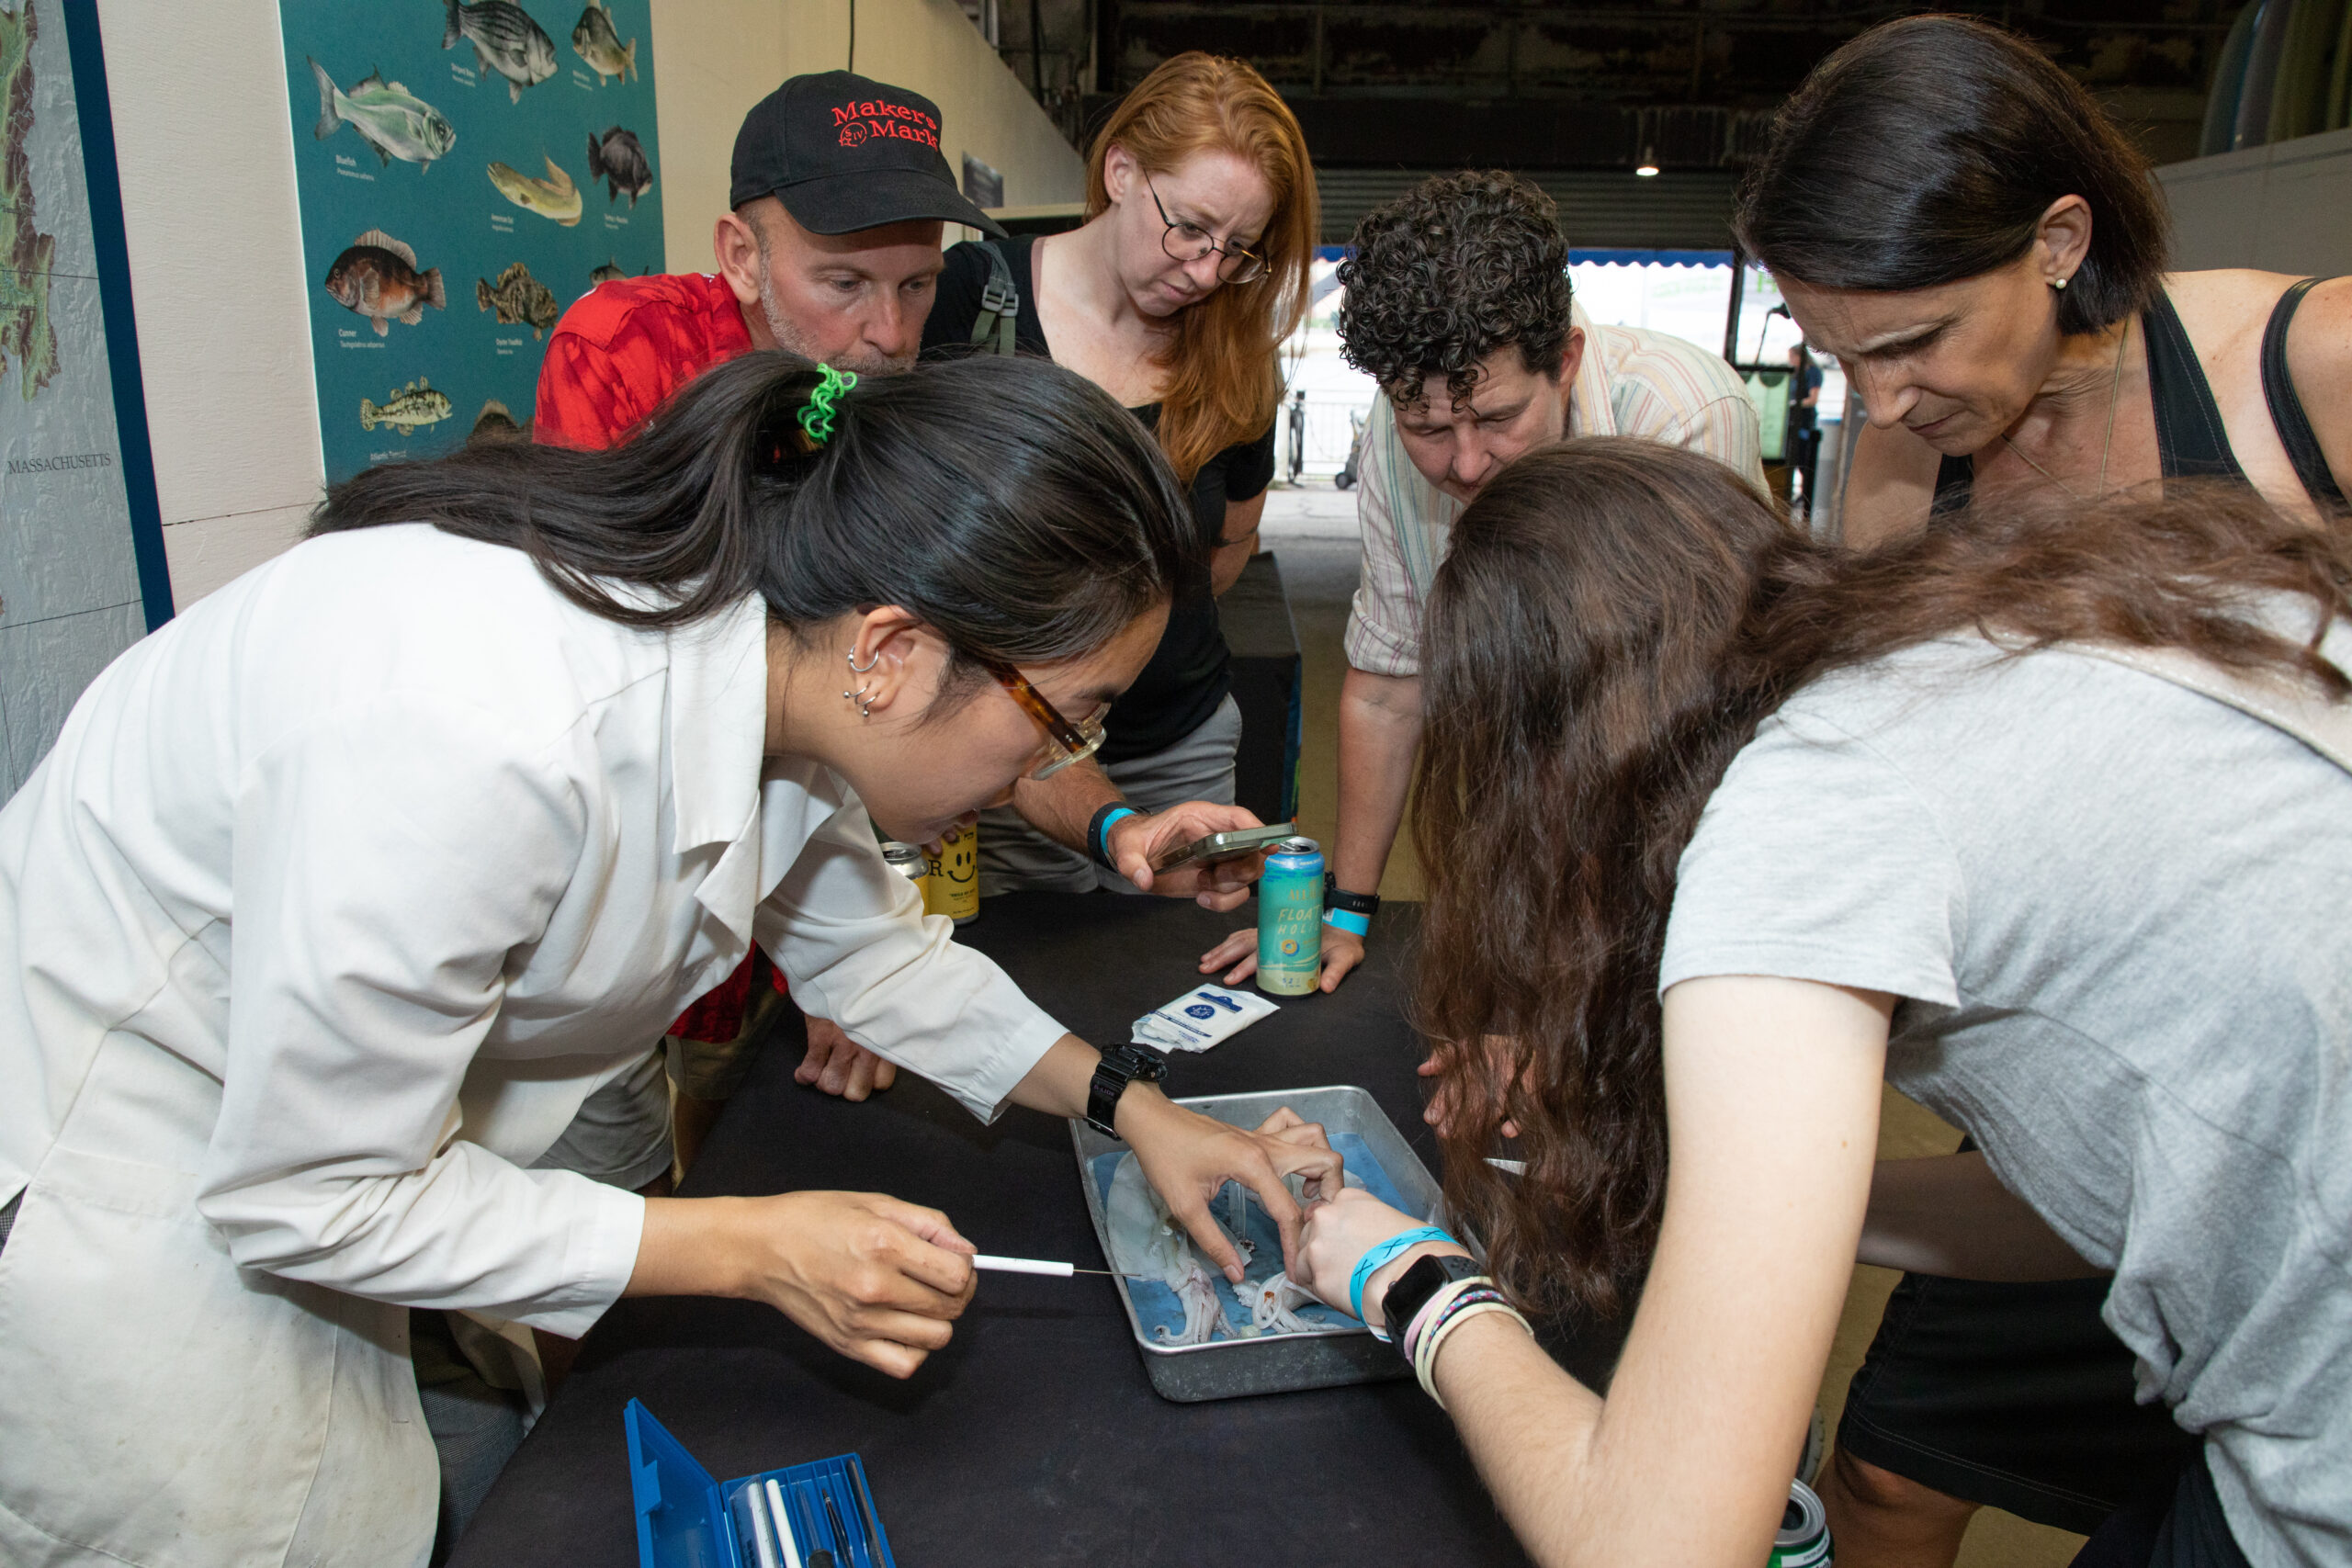 Students looking at an exhibit during an Ask a Scientist event at the Pier 40 Wetlab